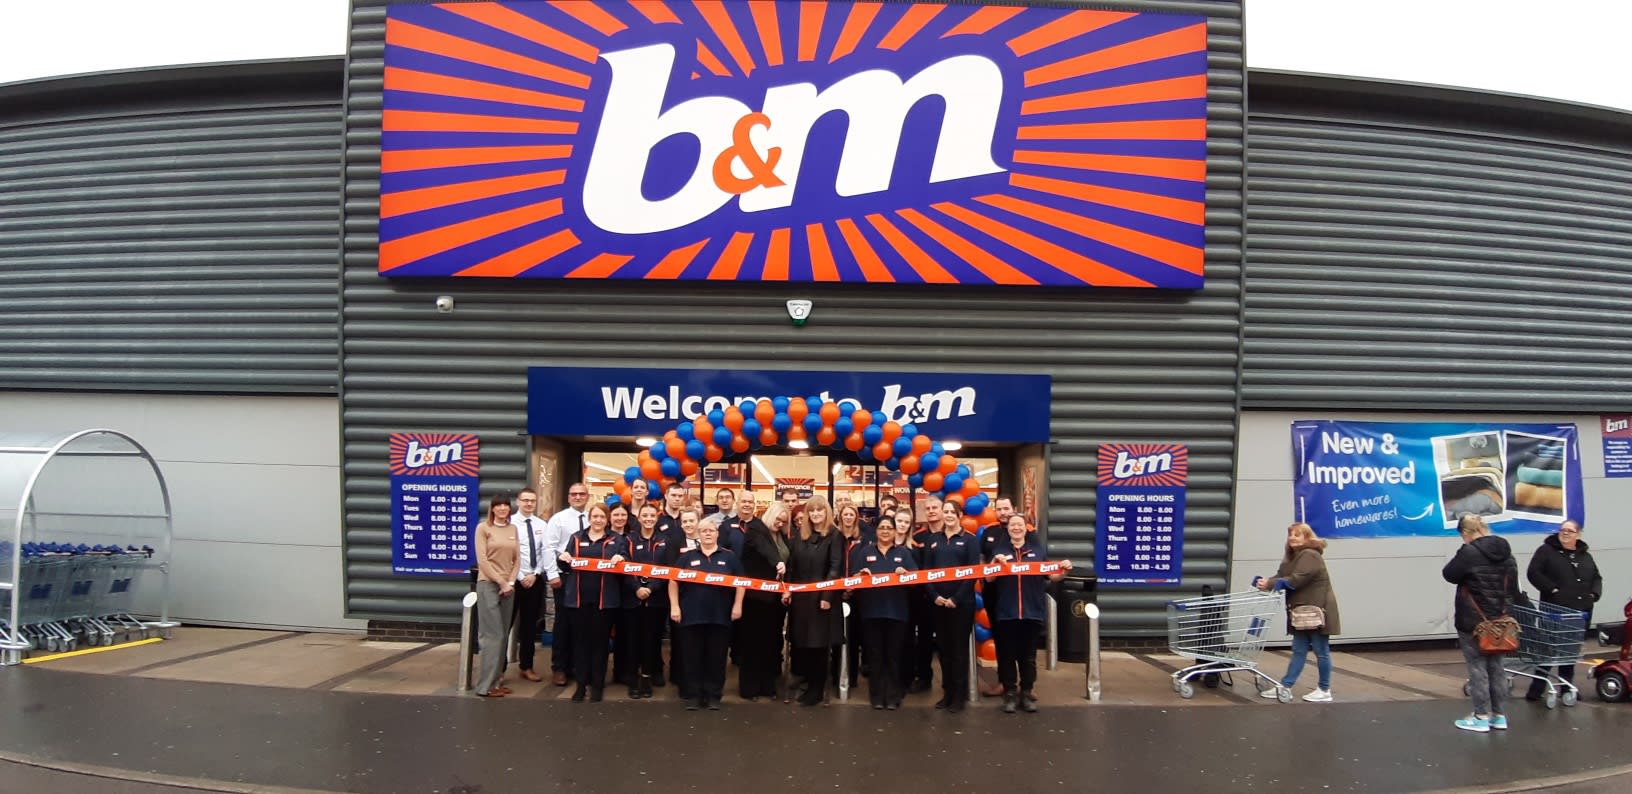 Store staff at B&M's refurbished store in Derby were delighted to welcome local charity Me & Dee as their special guest. The charity received £250 worth of B&M vouchers for taking part in B&M's special day, and as a thank your for their hard work and dedi